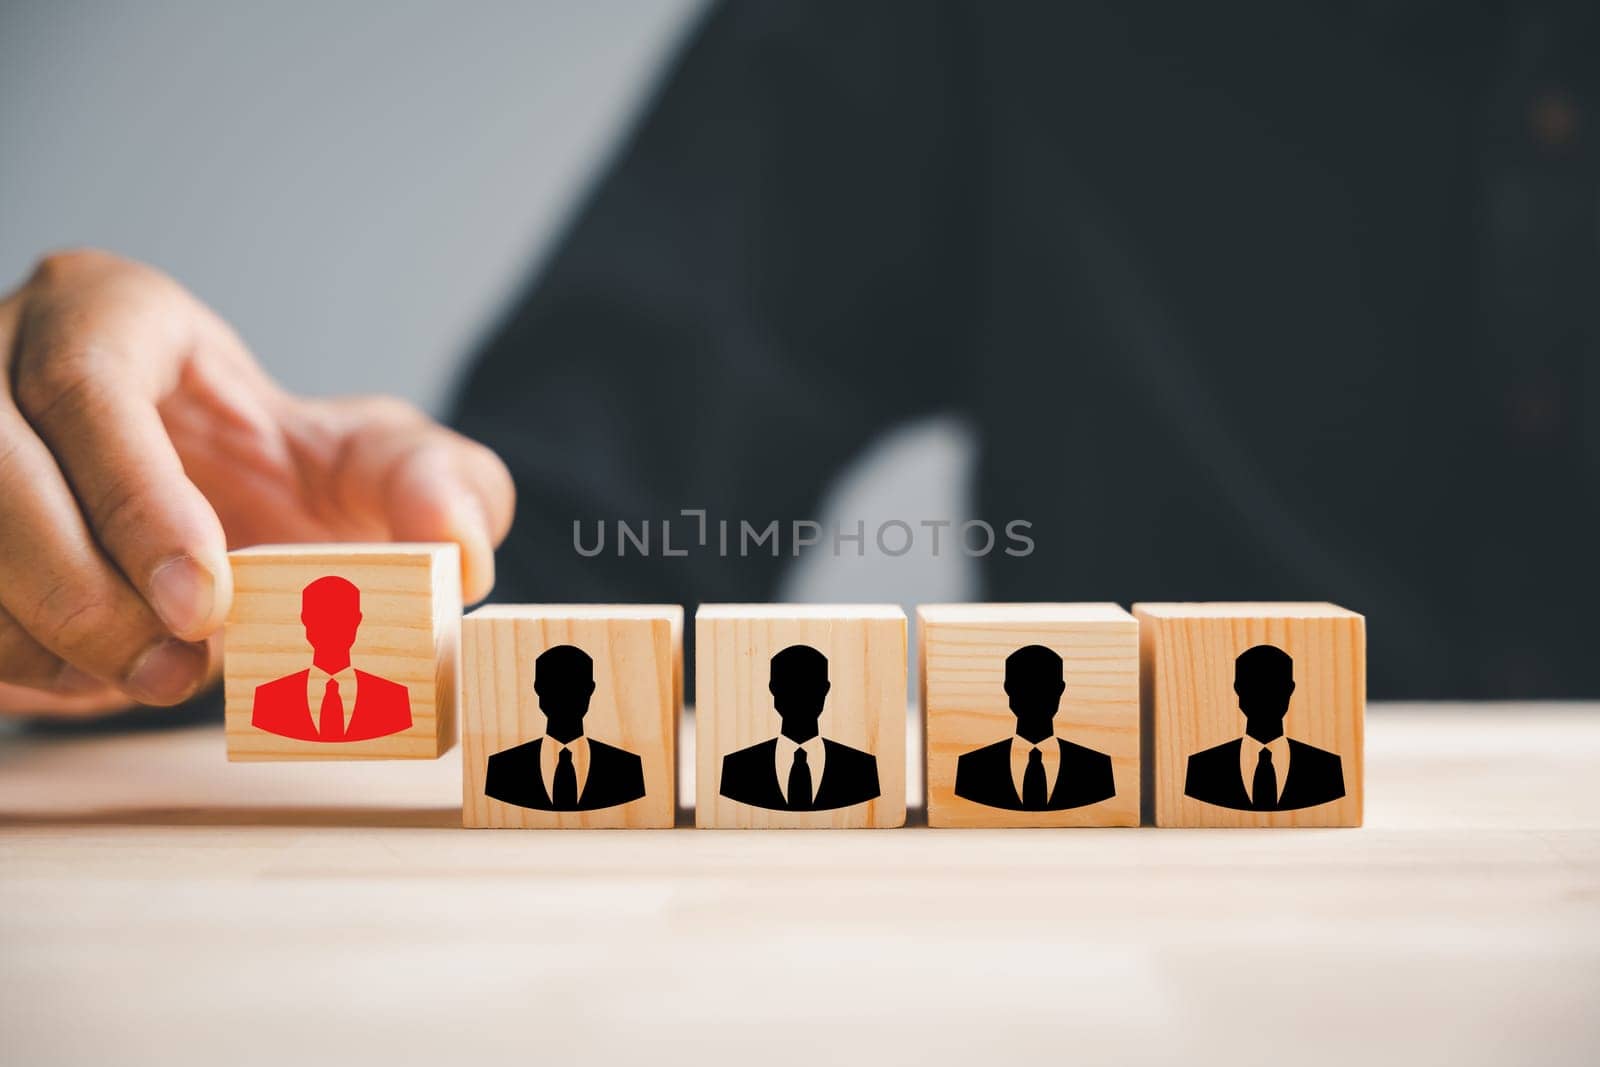 Hand picking up red human icon on wooden block. Business hiring recruitment. Career opportunity. HR Management. Leadership empowering new leaders. Shaping future workforce. Human resource management